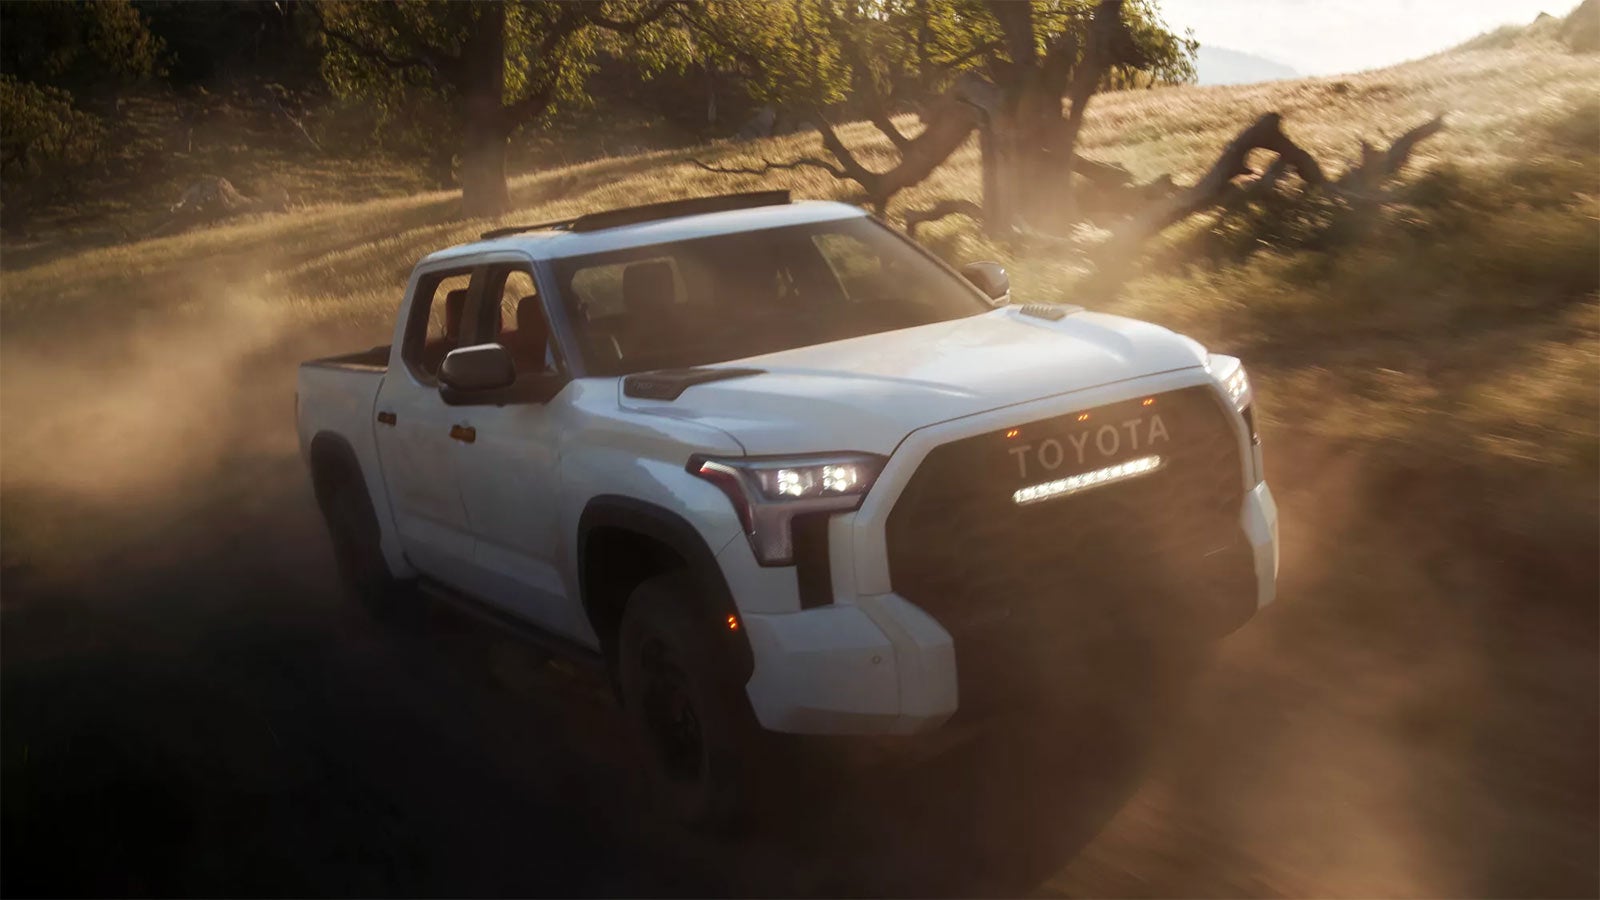 2022 Toyota Tundra Gallery | Middletown Toyota in Middletown CT